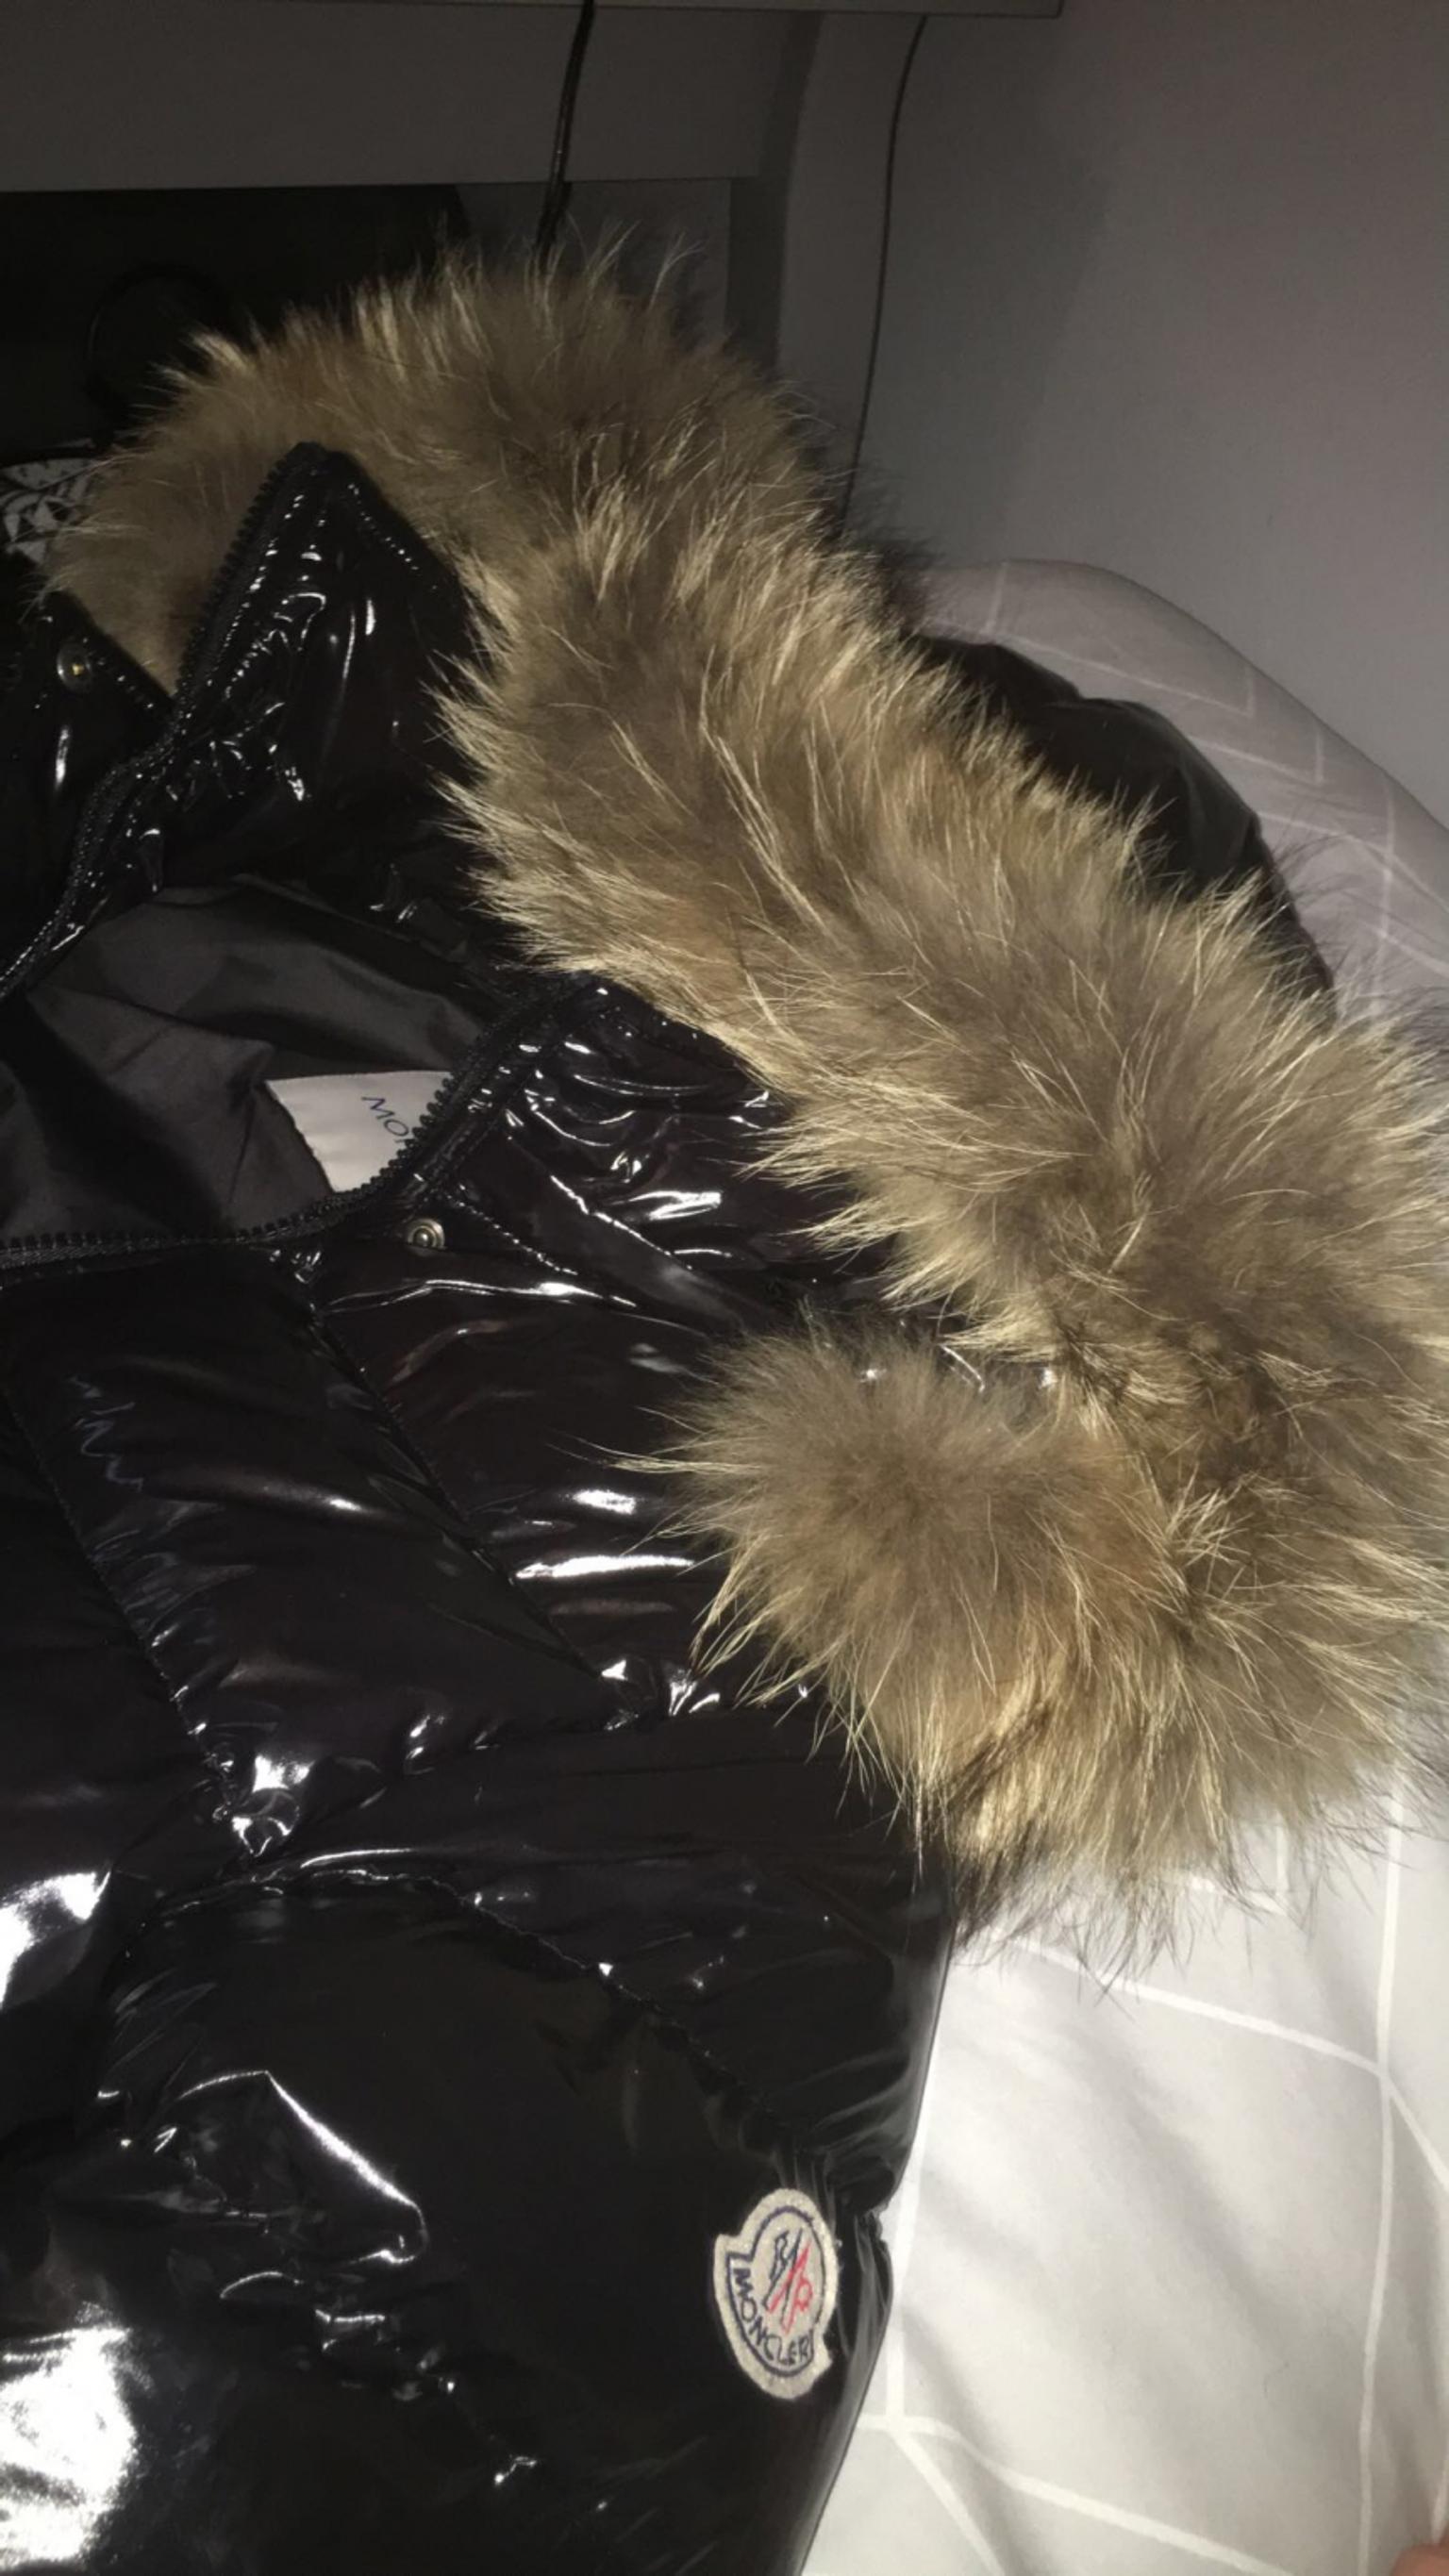 womens moncler jacket with fur hood